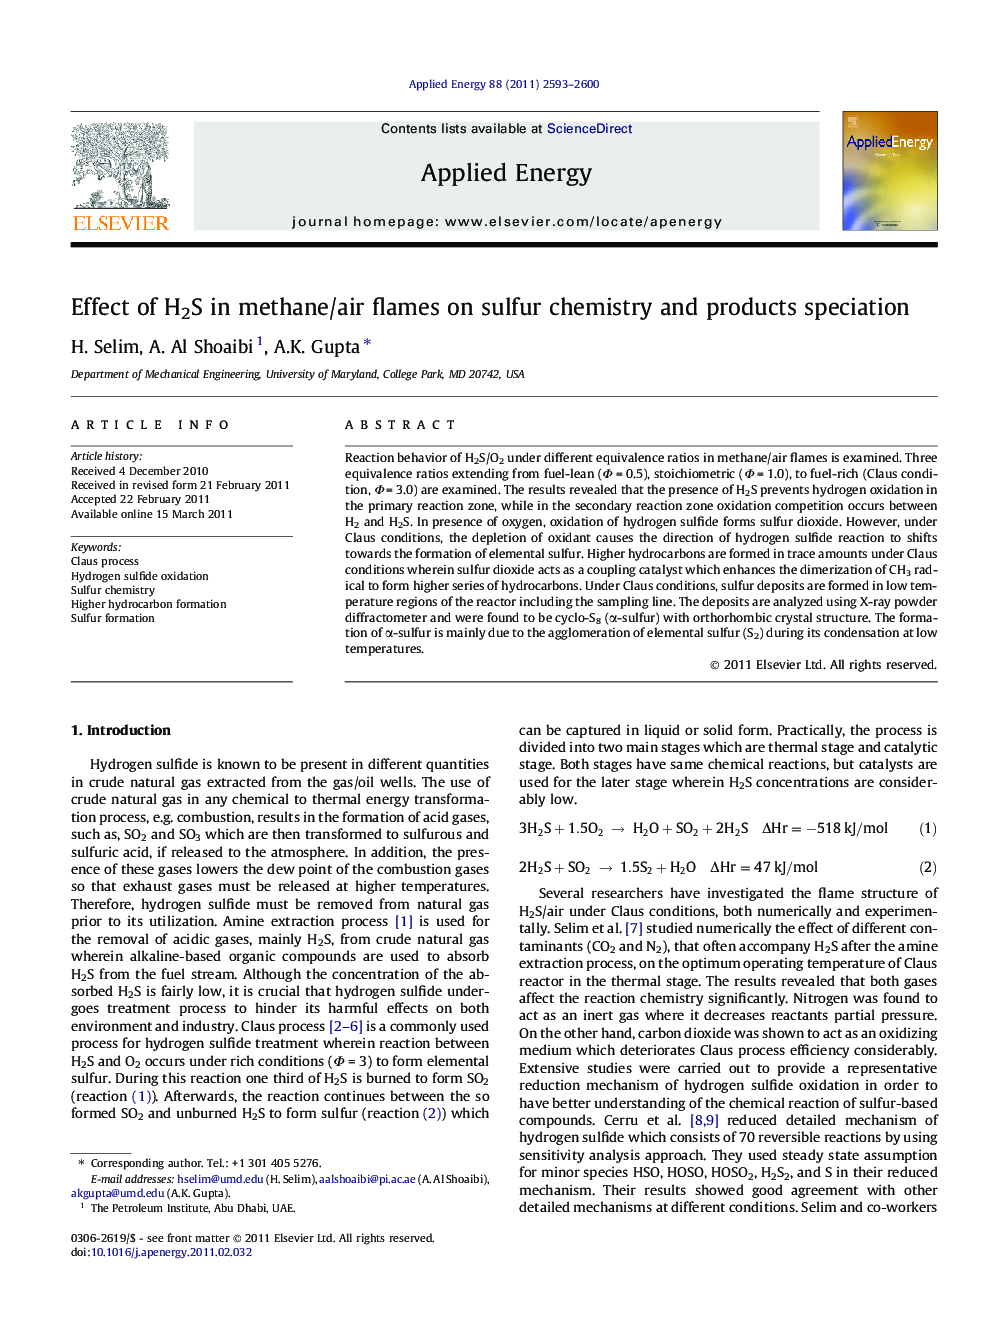 Effect of H2S in methane/air flames on sulfur chemistry and products speciation